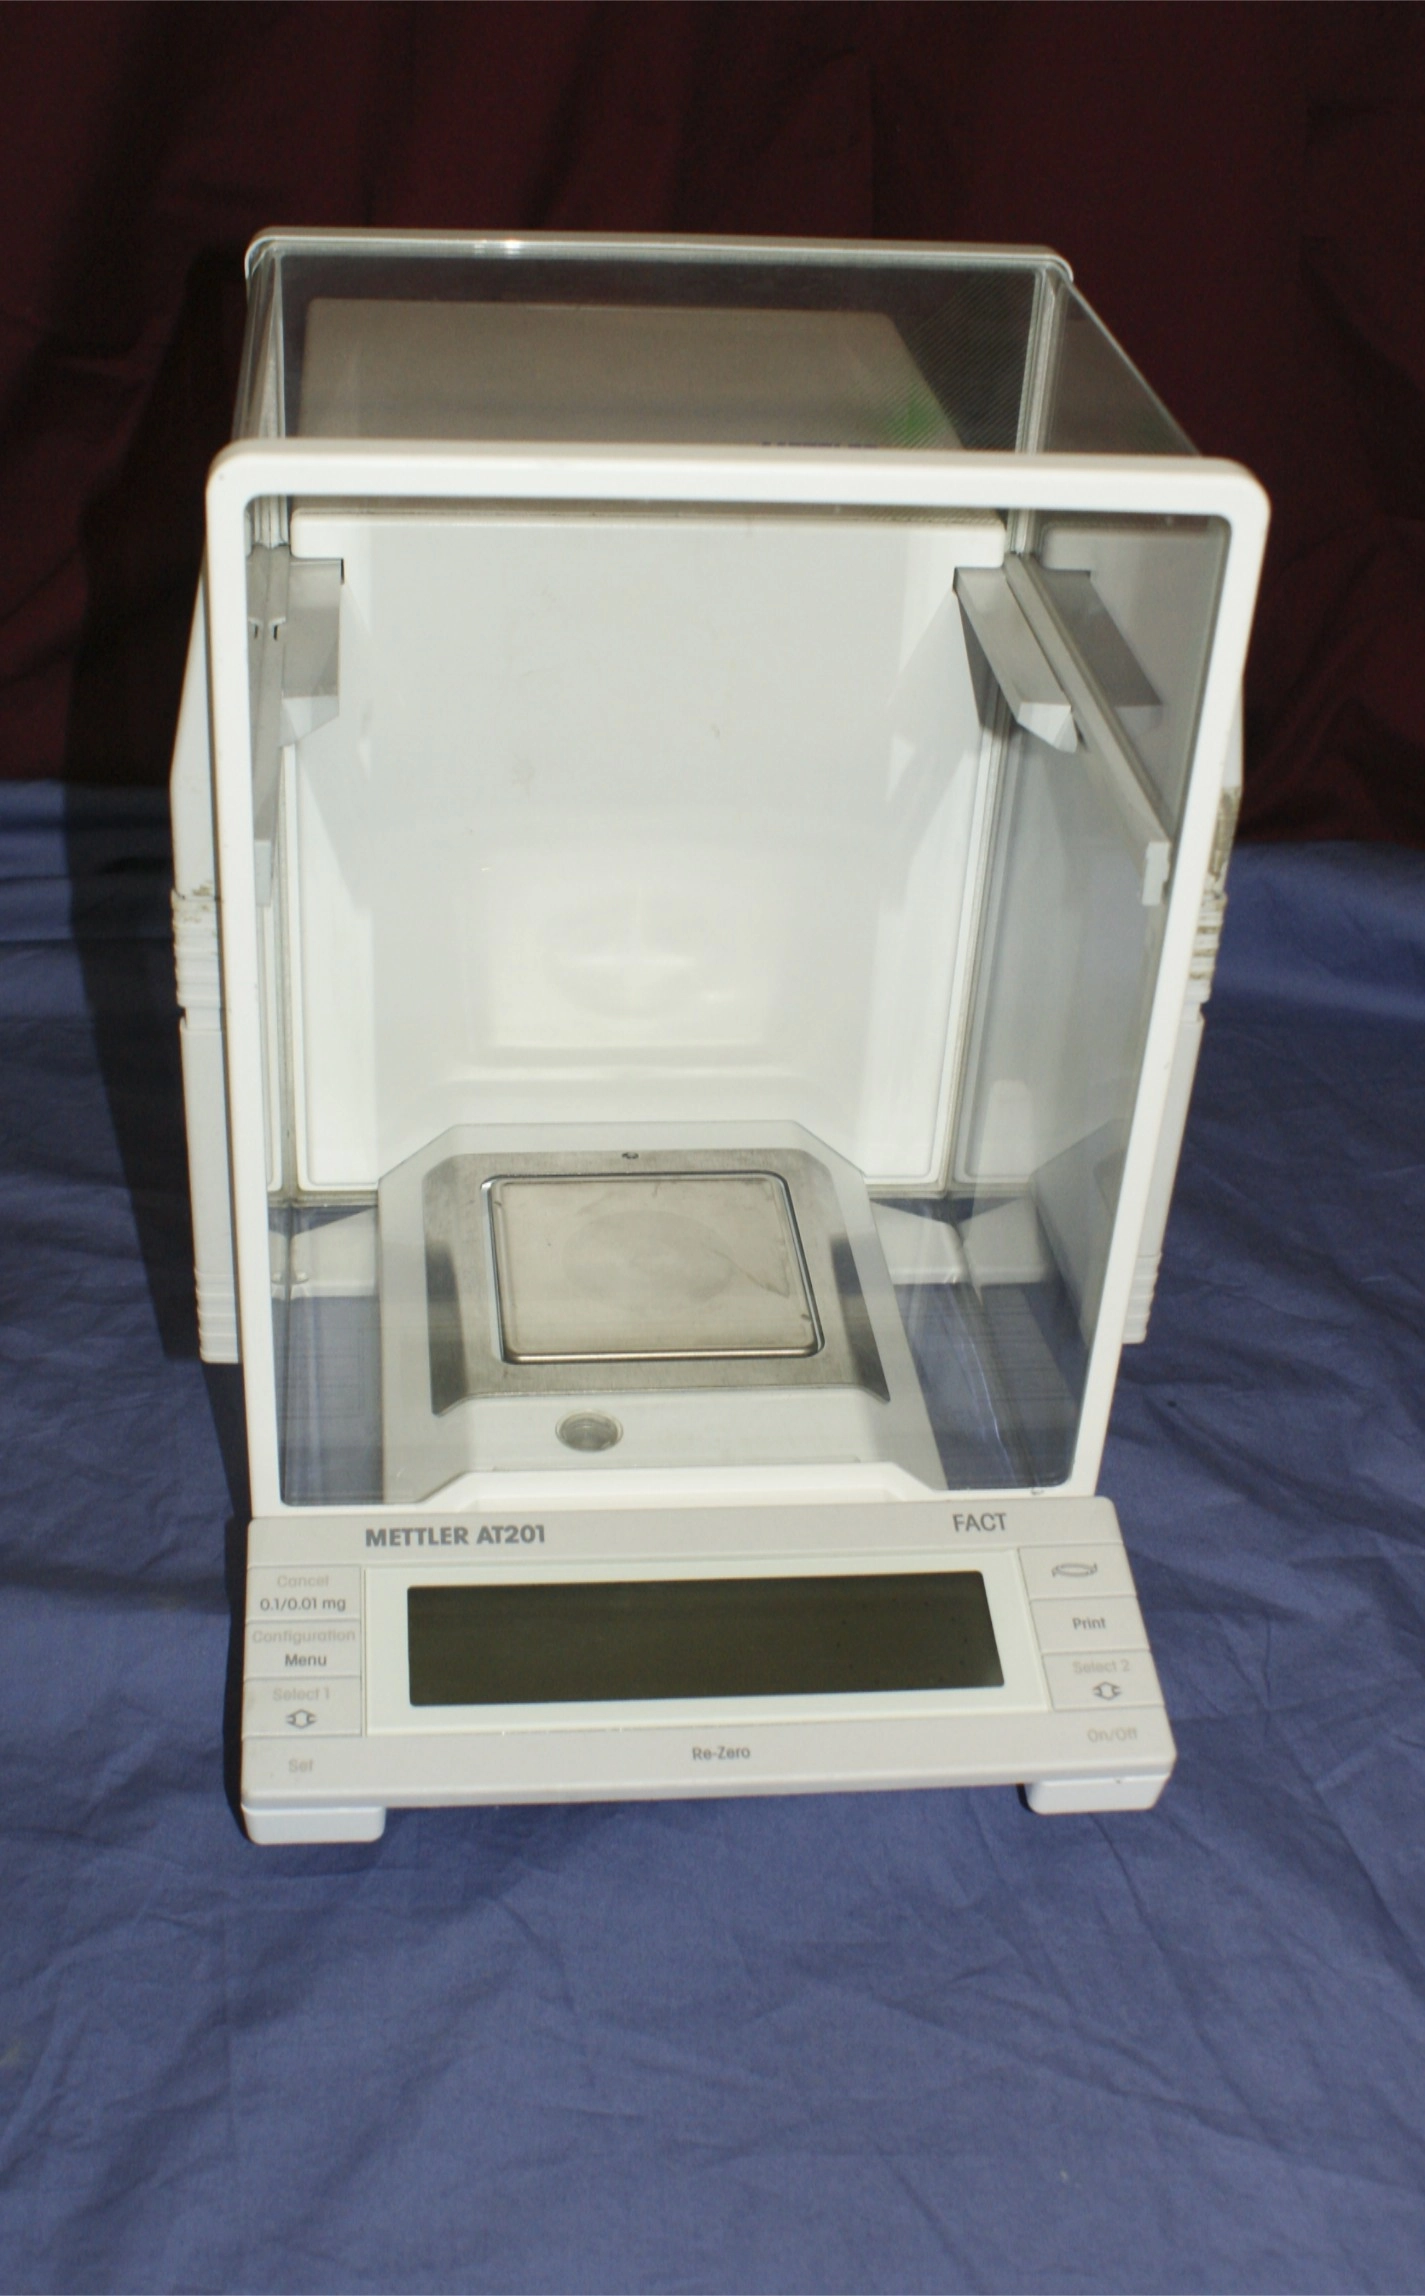 Mettler AT201 Analytical Balance Mettler Toledo AT201 5 Place balace used with power supply and all glassware